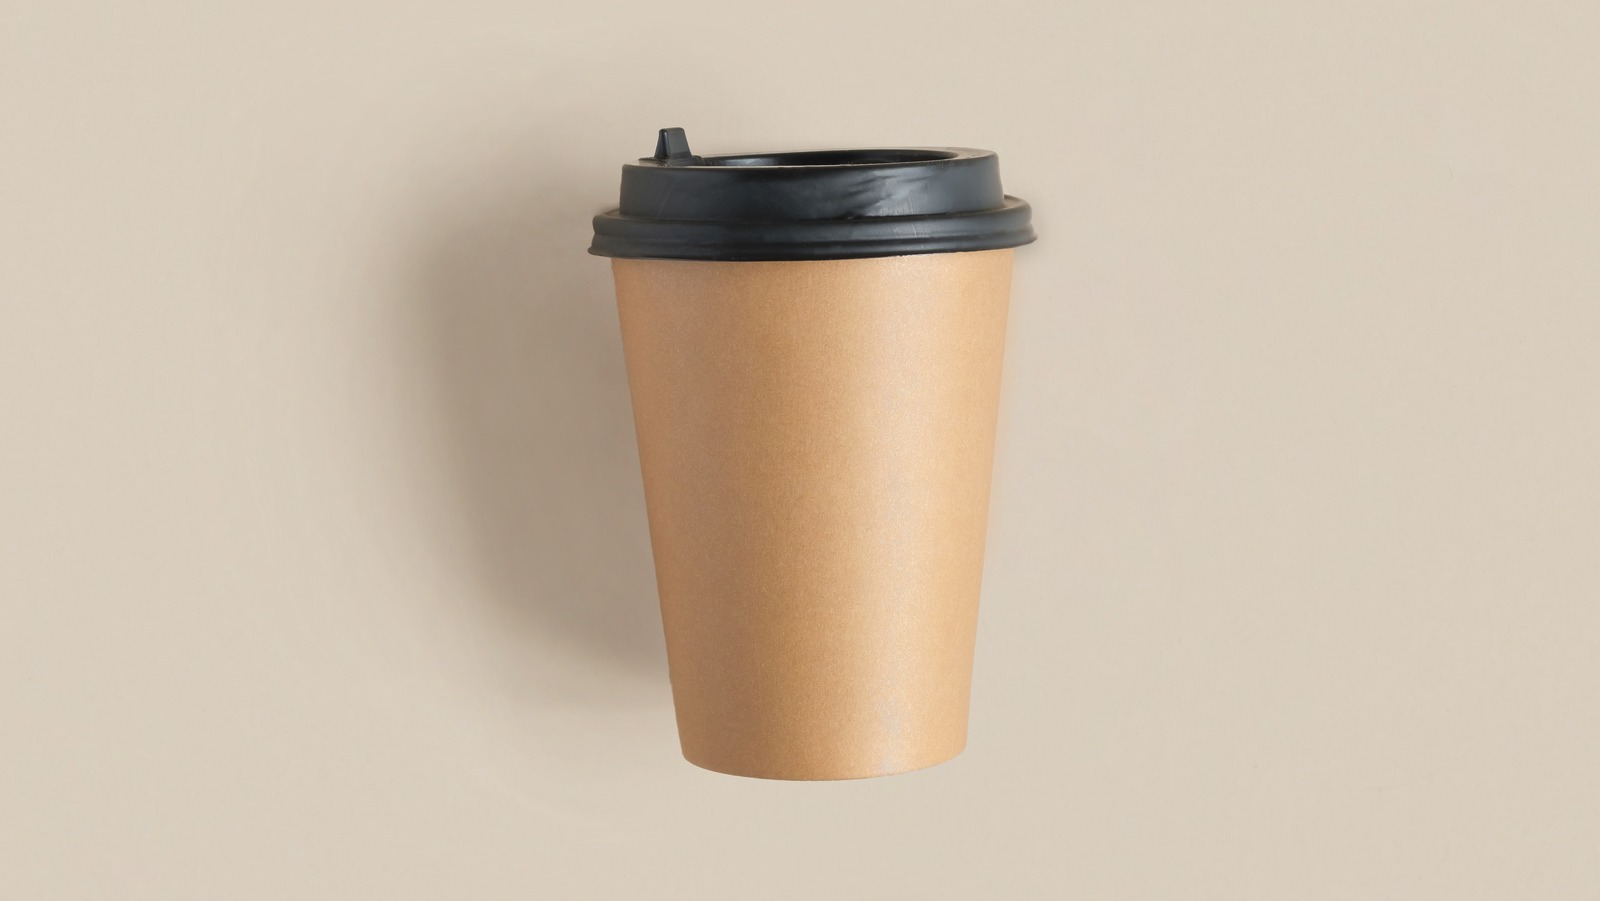 https://www.tastingtable.com/img/gallery/why-paper-coffee-cups-arent-actually-plastic-free/l-intro-1651790410.jpg